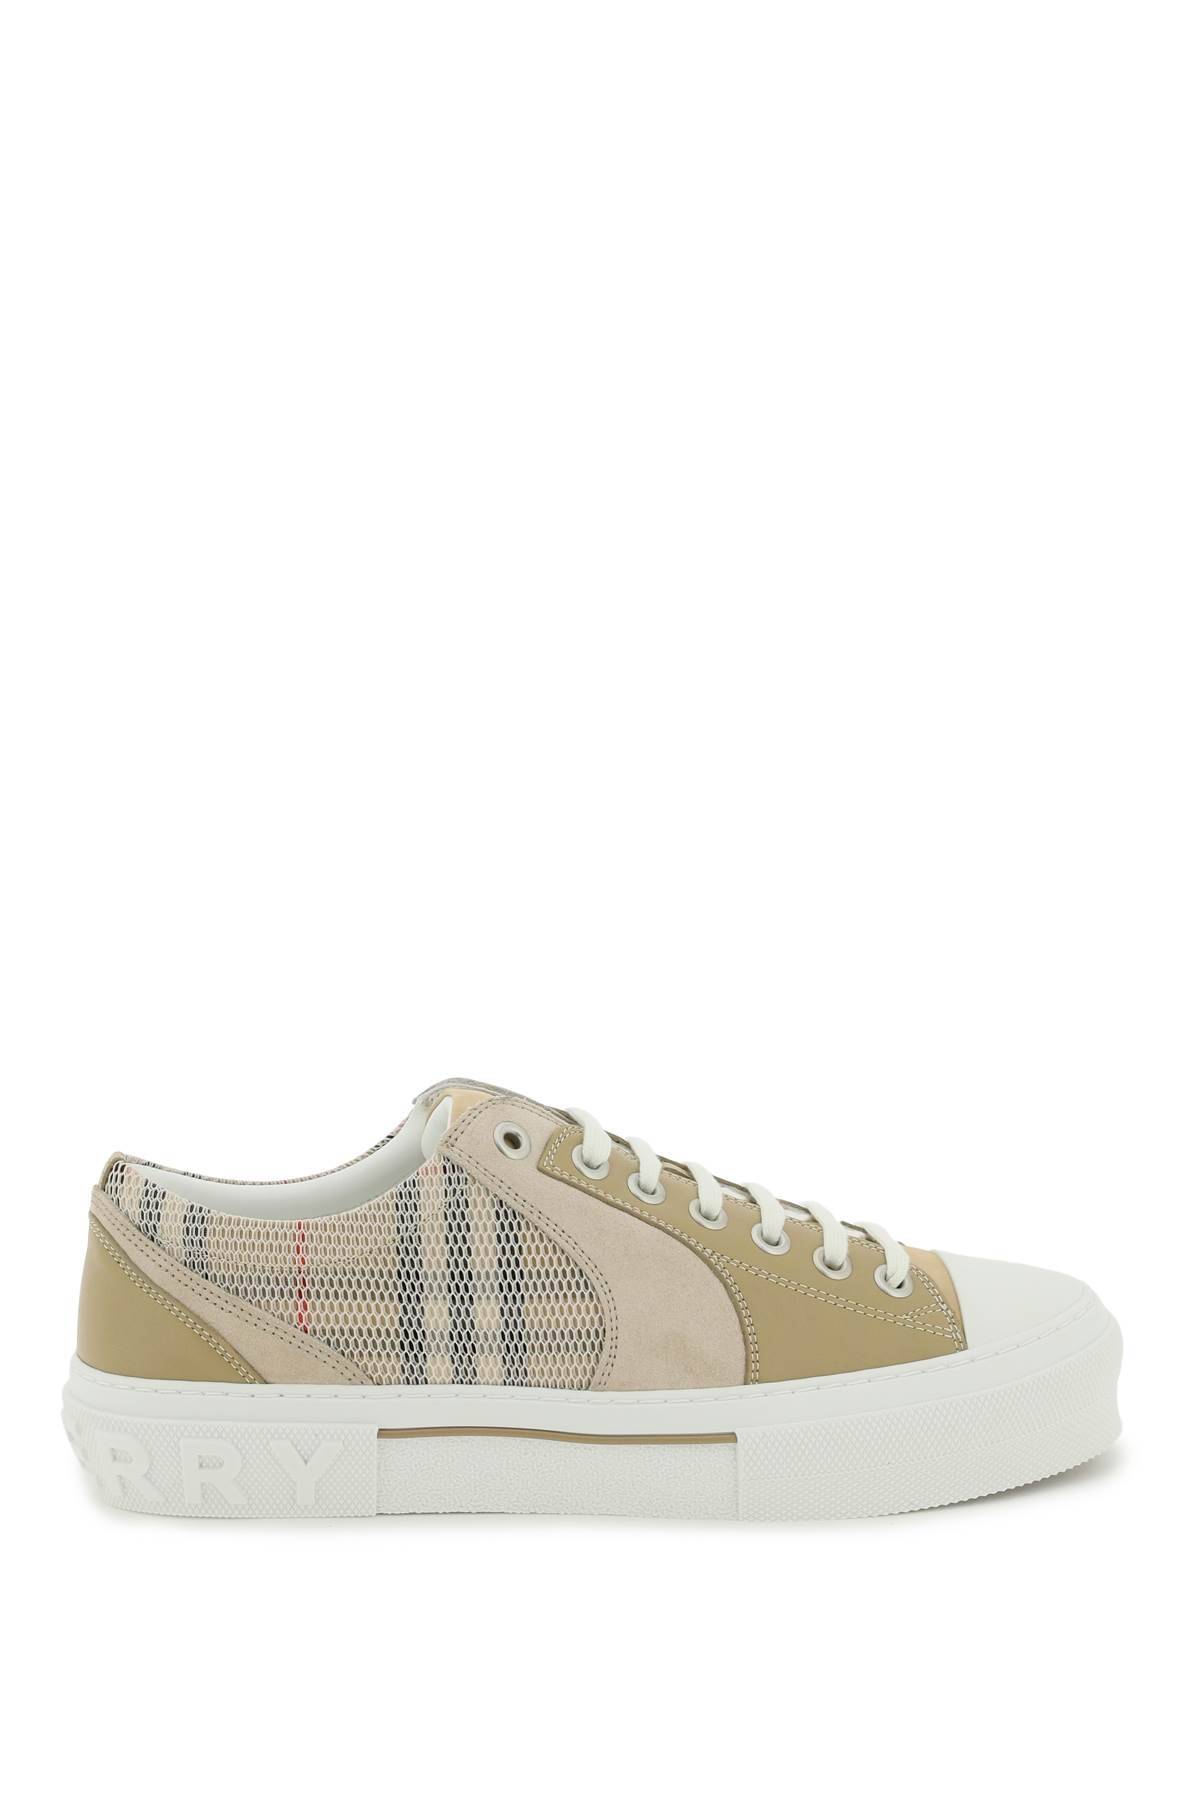 Shop Burberry Vintage Check &amp; Leather Sneakers In Beige,white